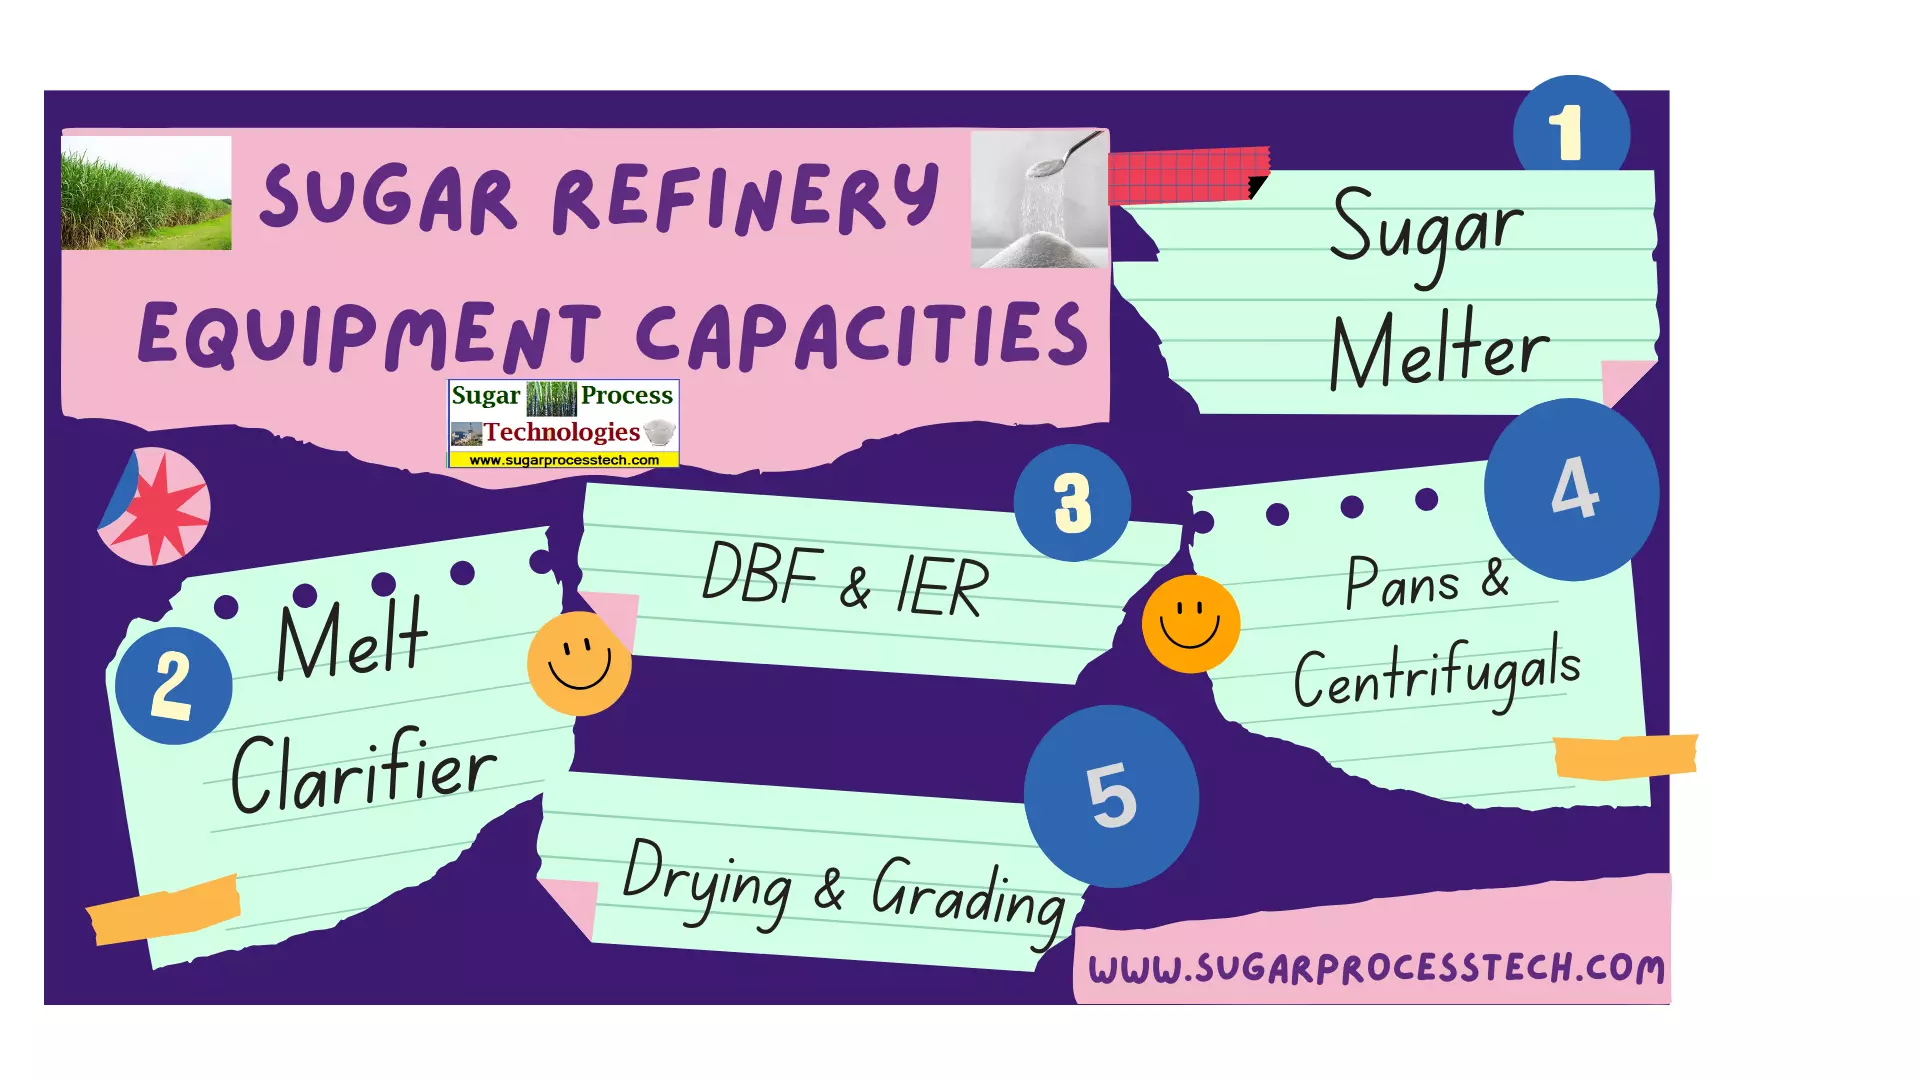 This article aims to provide a basic informative guide to calculating equipment capacities for essential components in a sugar refinery, such as the raw sugar melter, melt clarification system, deep bed filters, ion exchange resin system, pan section and the centrifugal section.